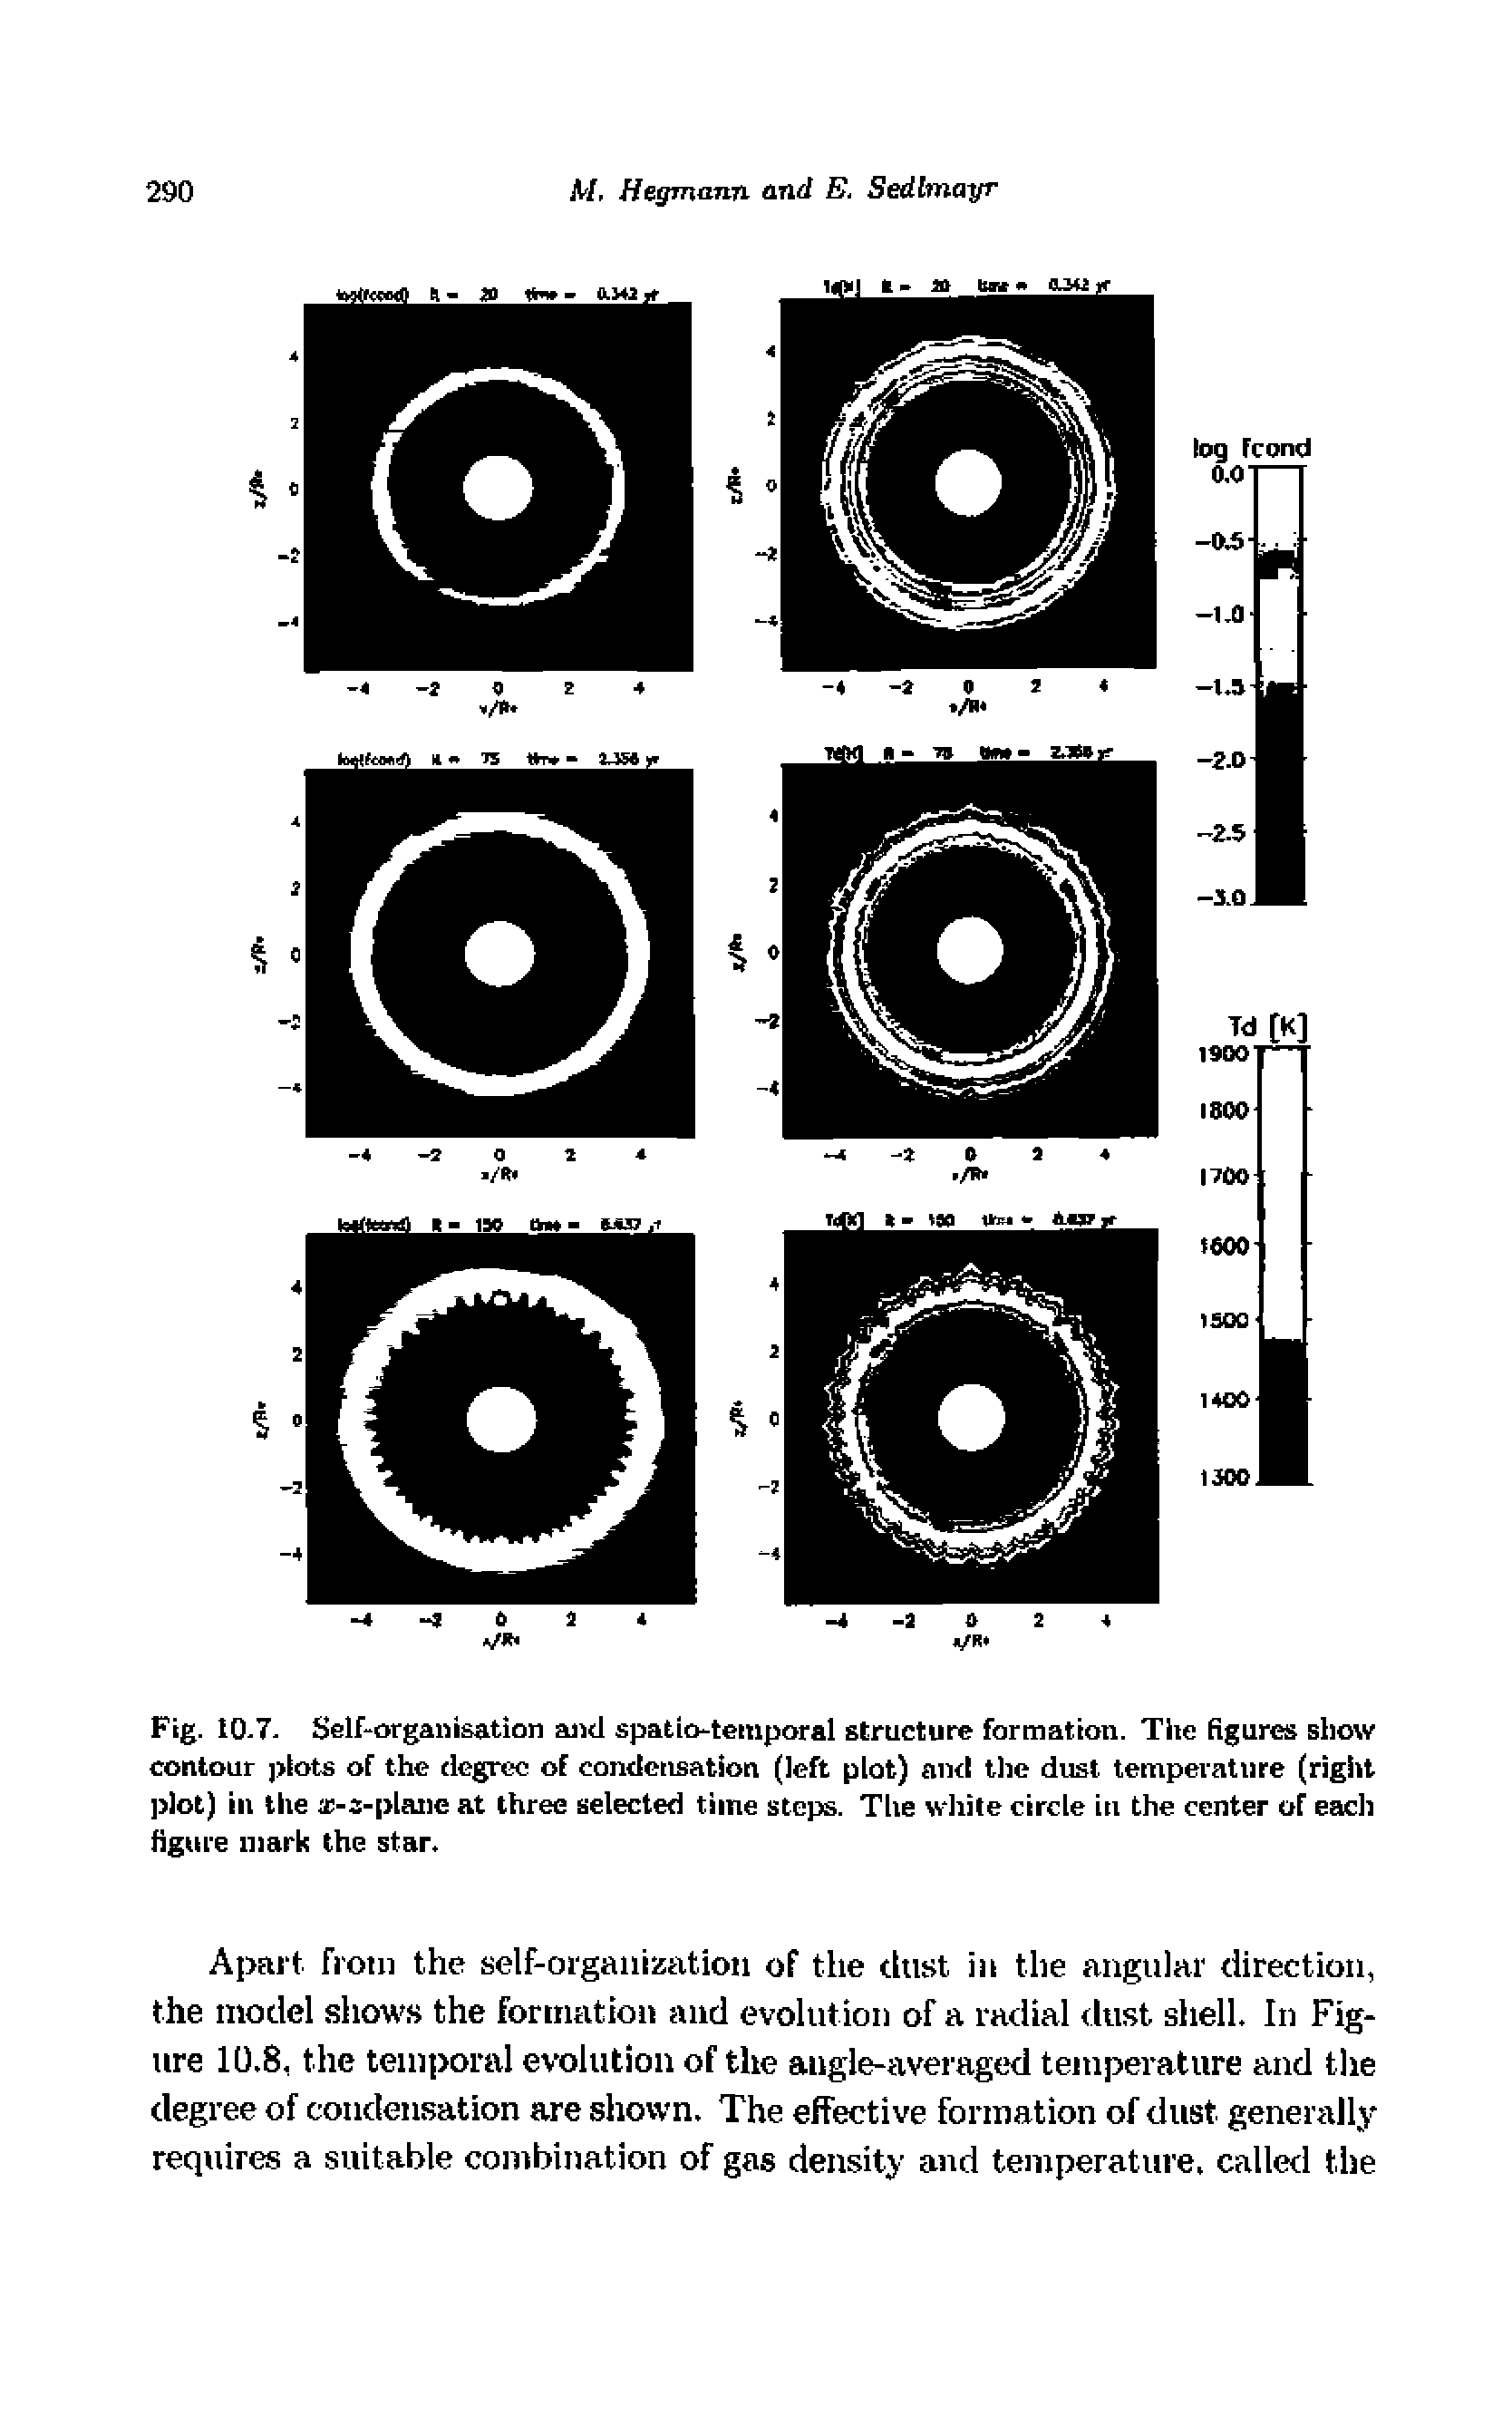 Fig. 10.7. Self-organisation and spatio-temporal structure formation. The figures show contour jjlots of the degree of condensation (left plot) and the dust temperature (right ])lot) in tile a-a-plaiie at three selected time steps. The white circle In the center of eacli figure mark the star.